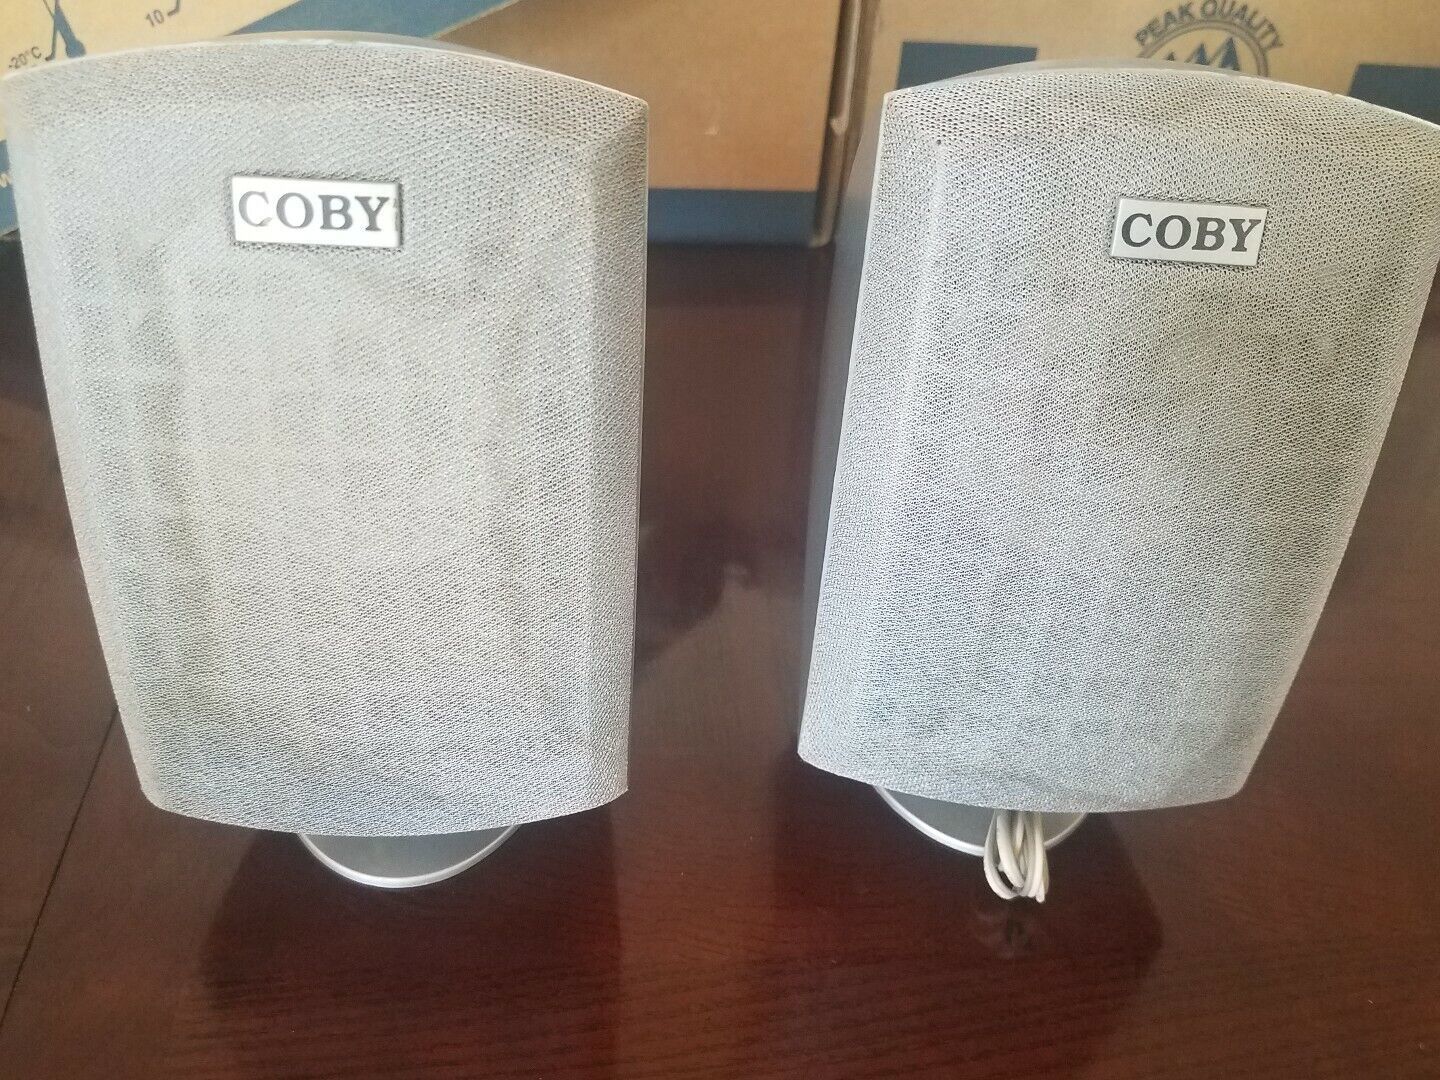 COBY Speakers In Home Audio - $60.33